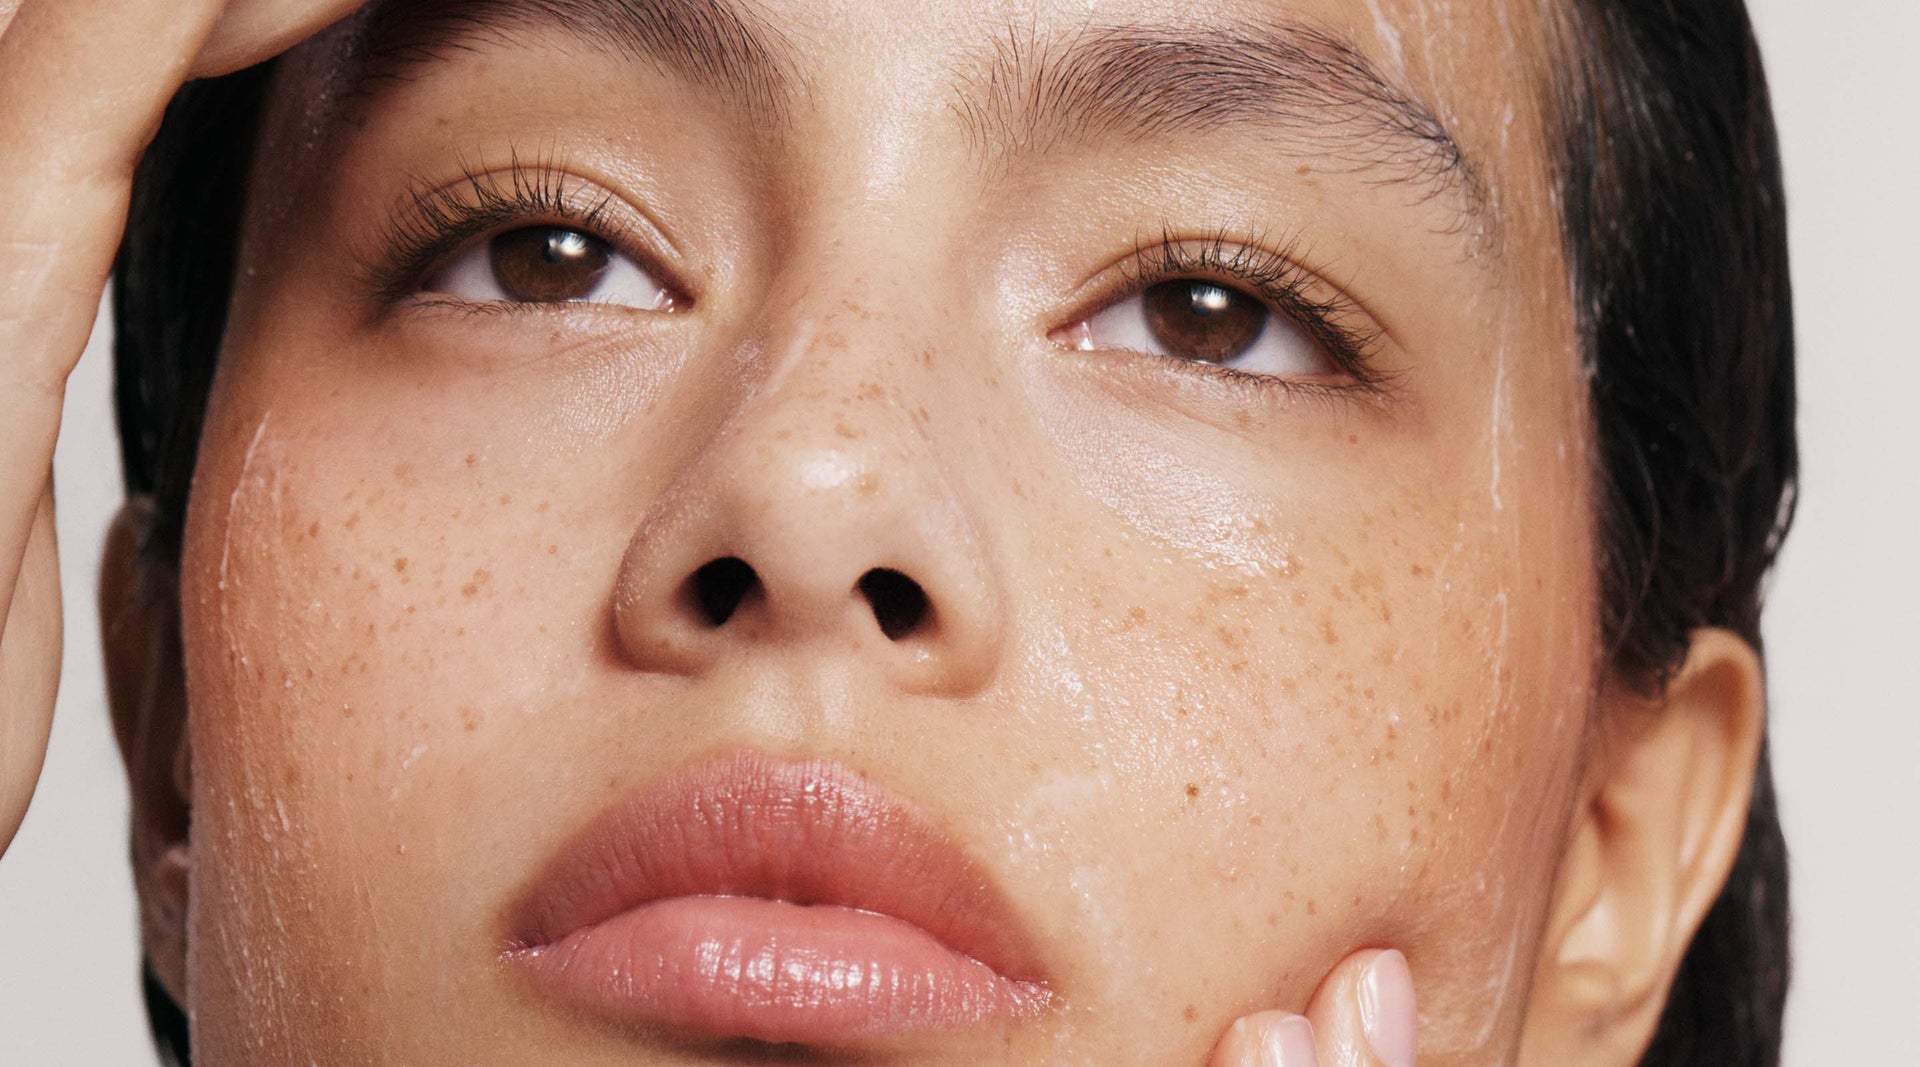 Pro Exfoliation Advice For Every Skin Type